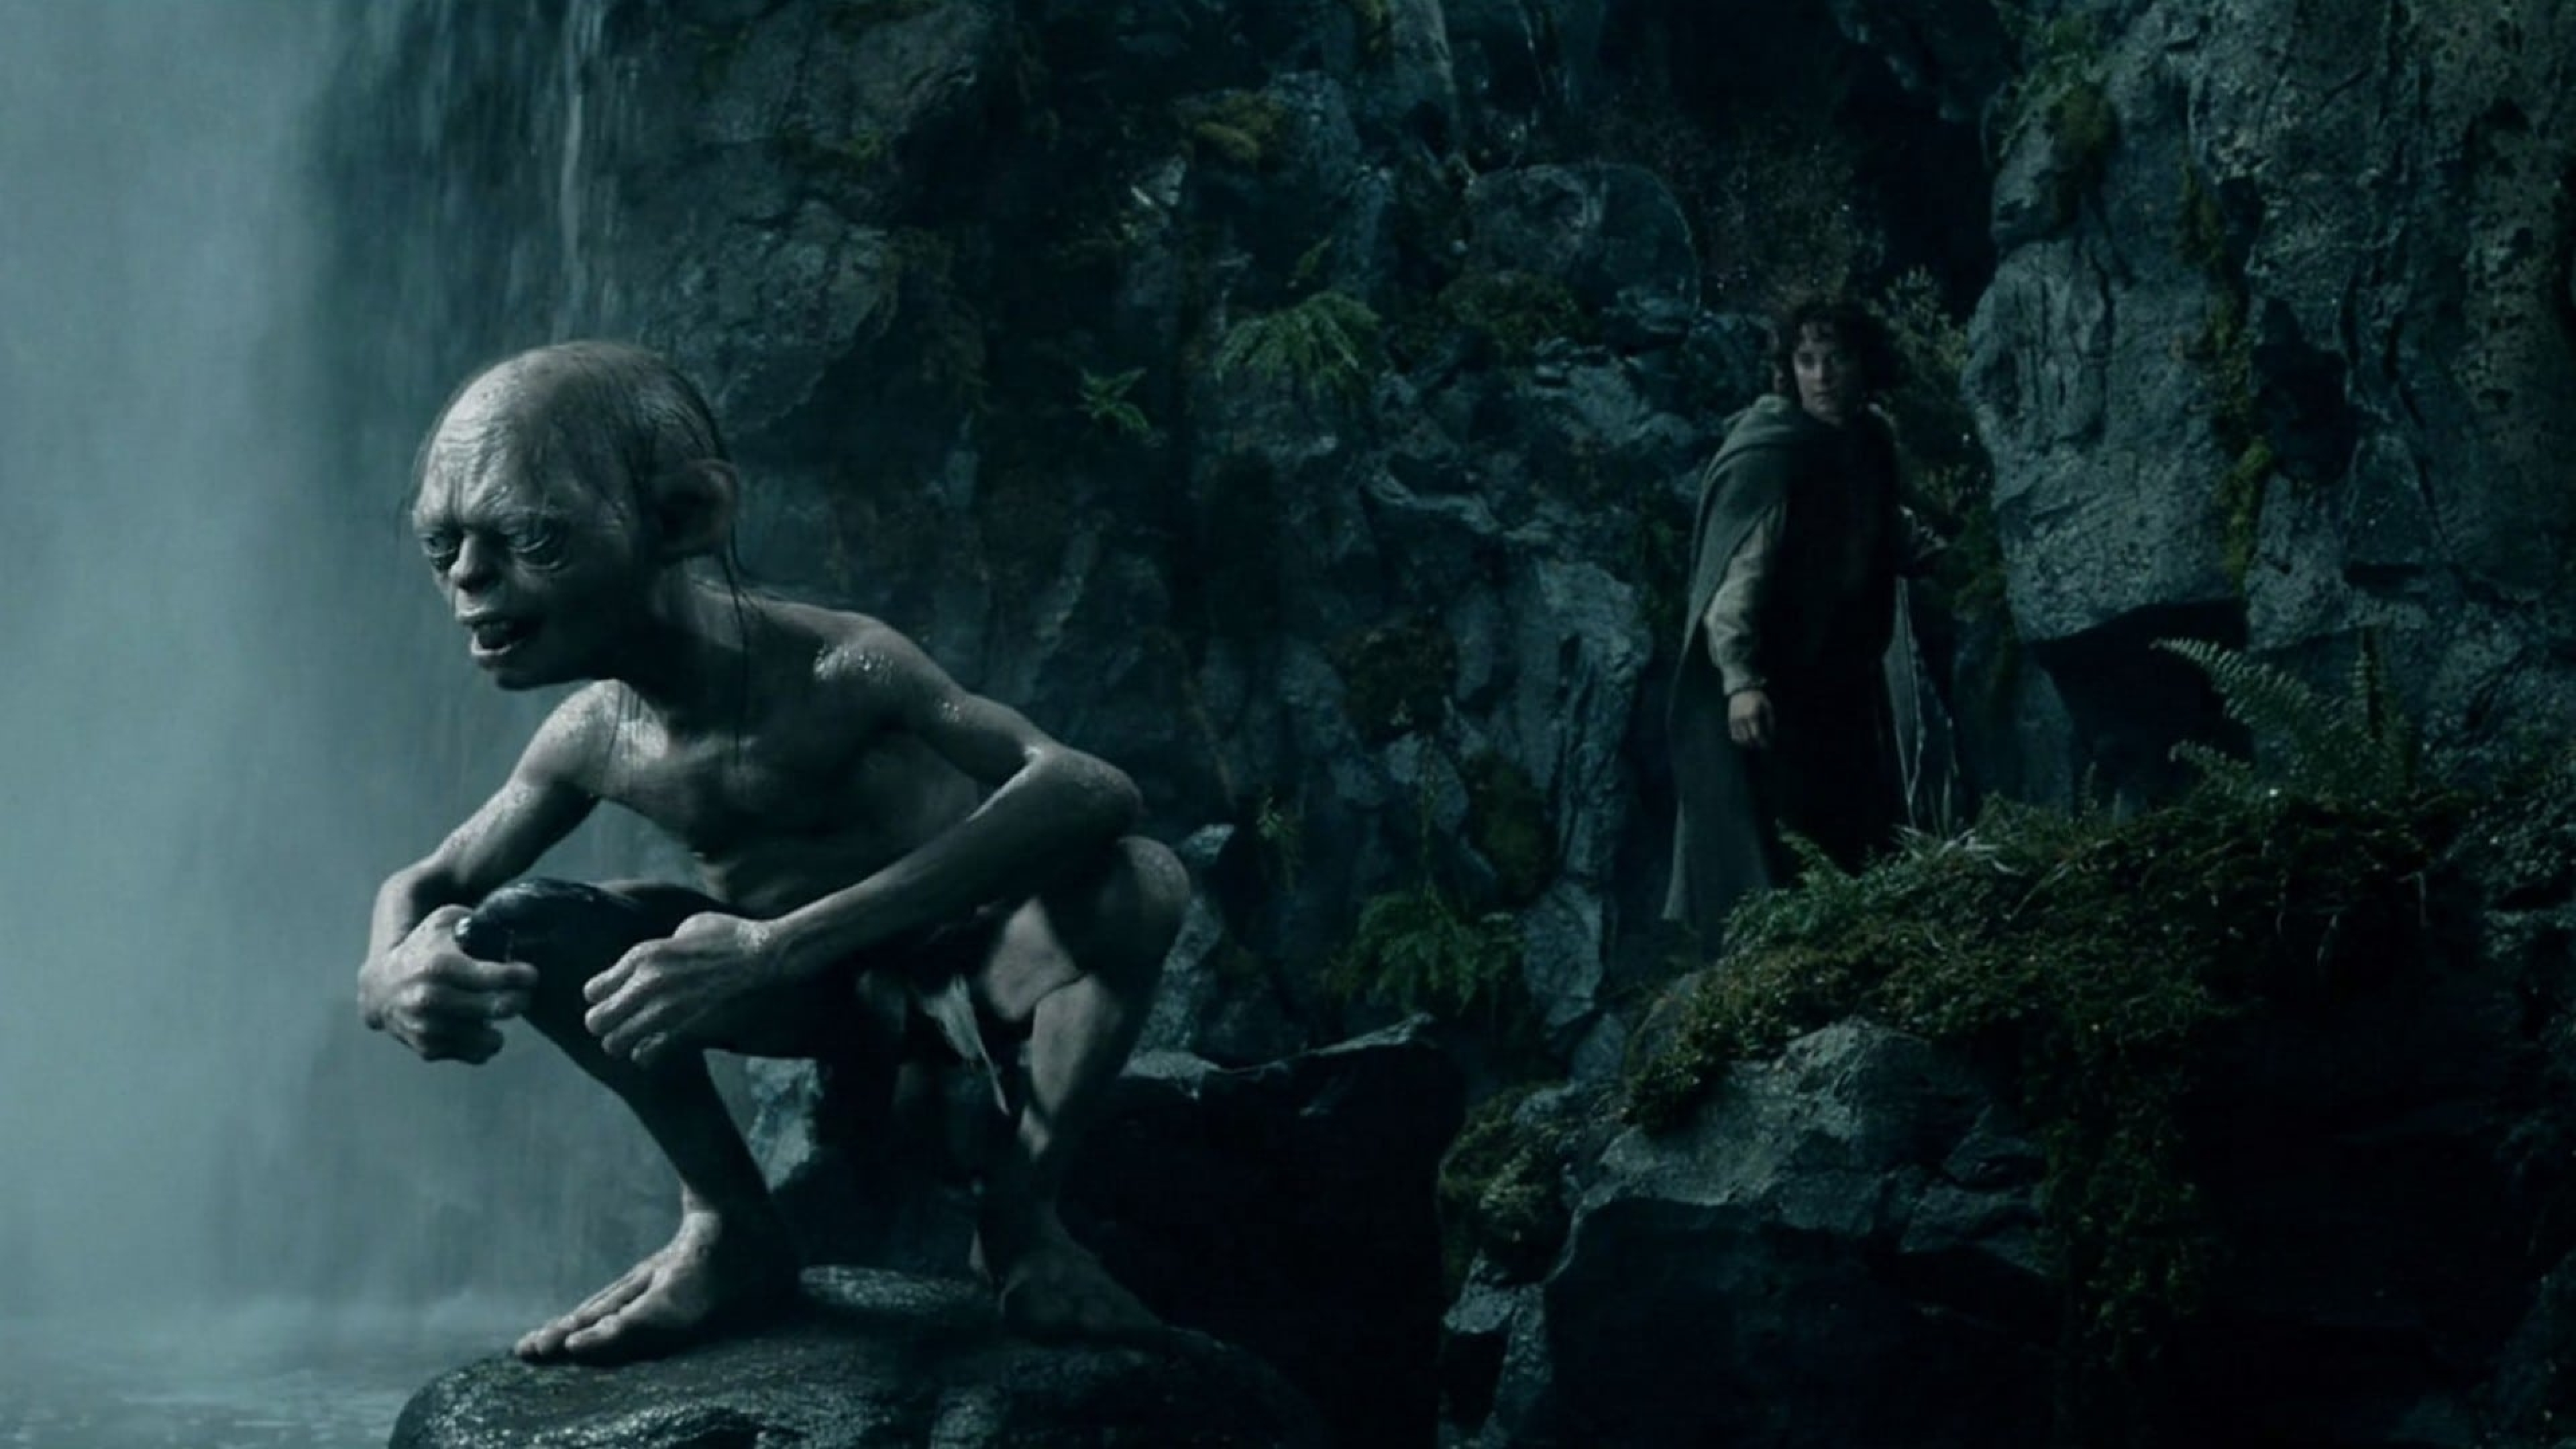 picture of gollum from the lord of the rings